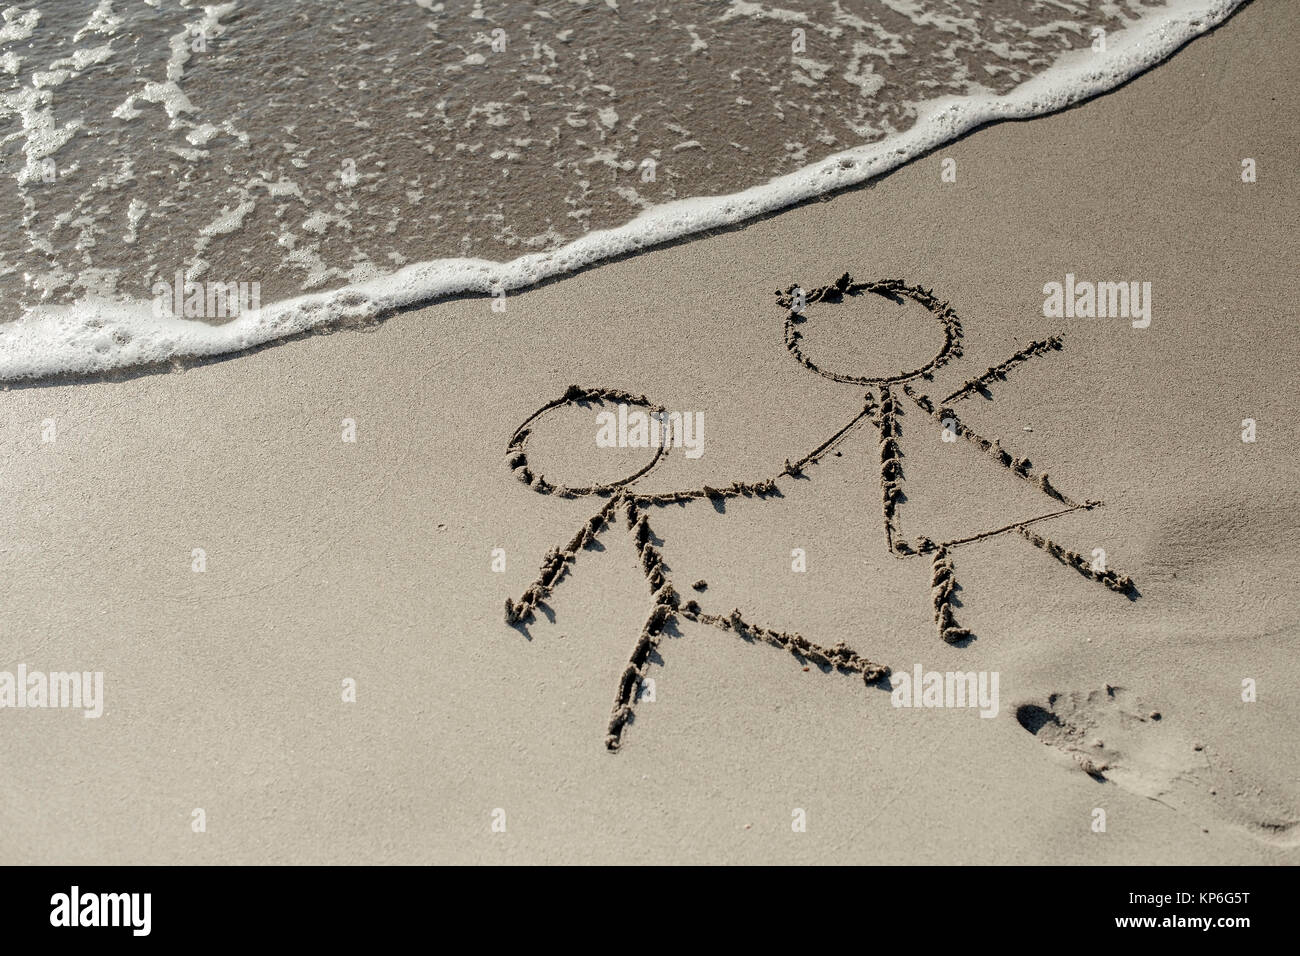 Paar im Sandstrand - couple at the beach, symbolic for Stock Photo